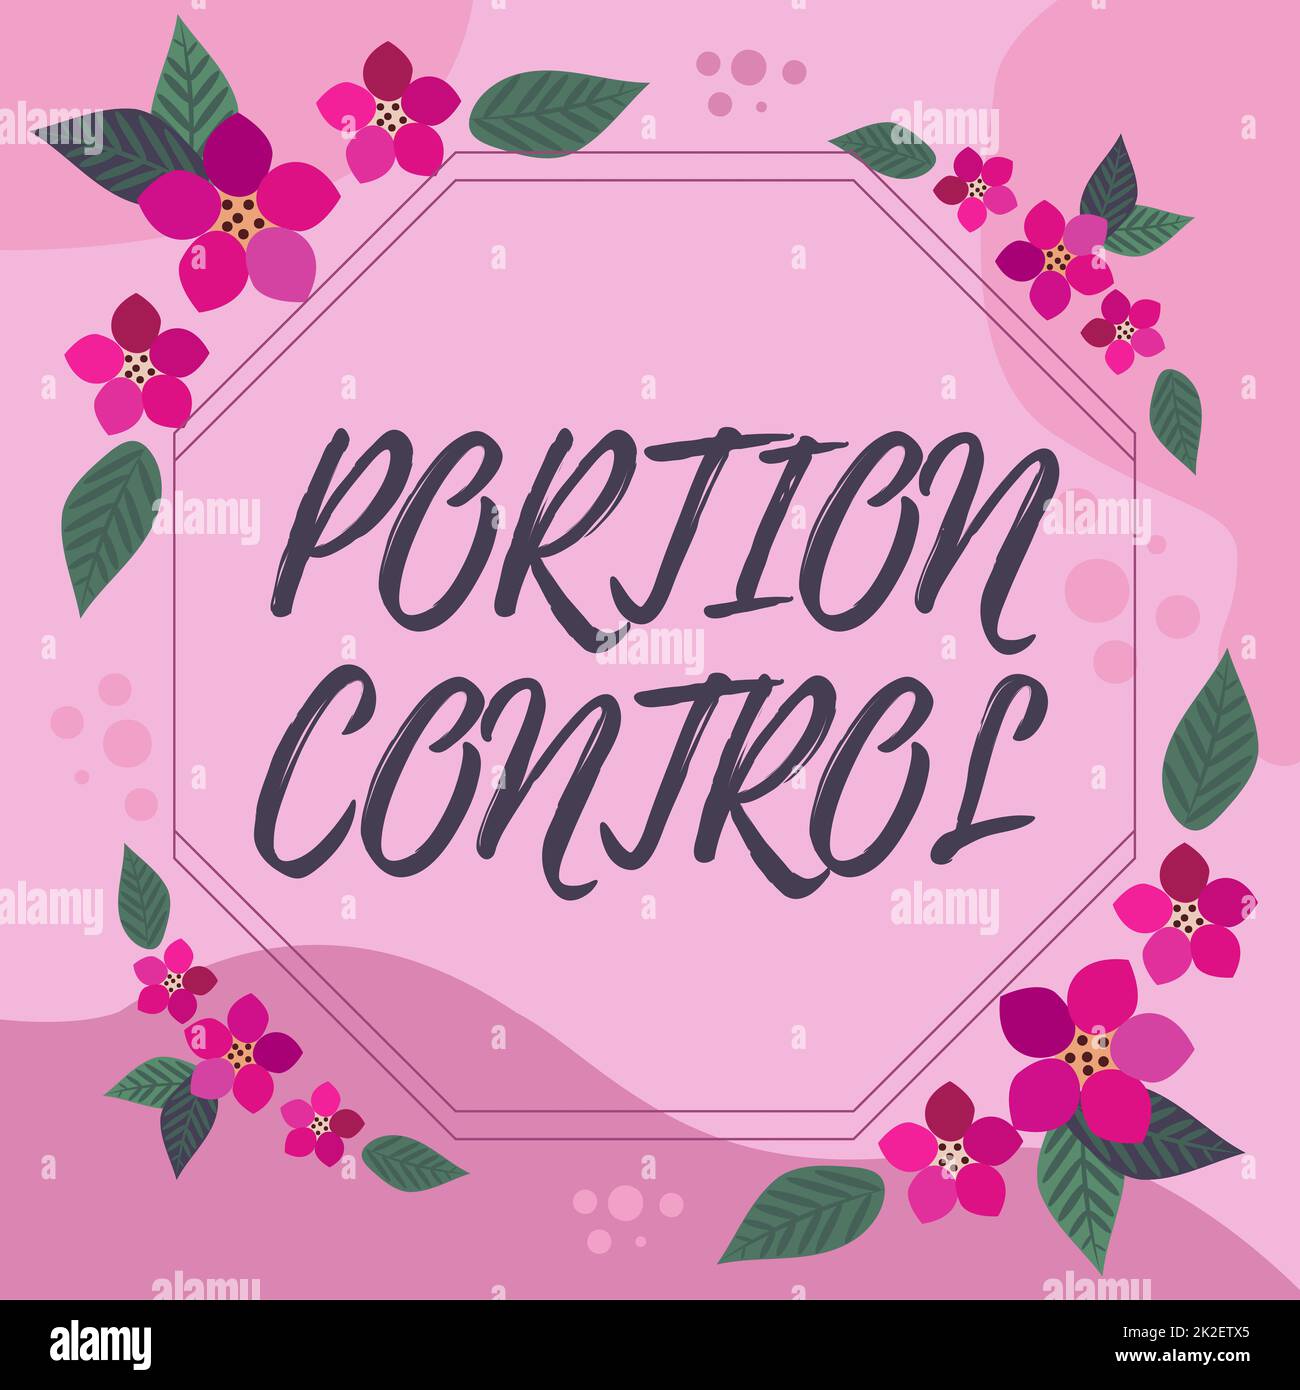 Text sign showing Portion Control. Business idea knowing the correct measures or serving sizes as per calorie Frame Decorated With Colorful Flowers And Foliage Arranged Harmoniously. Stock Photo